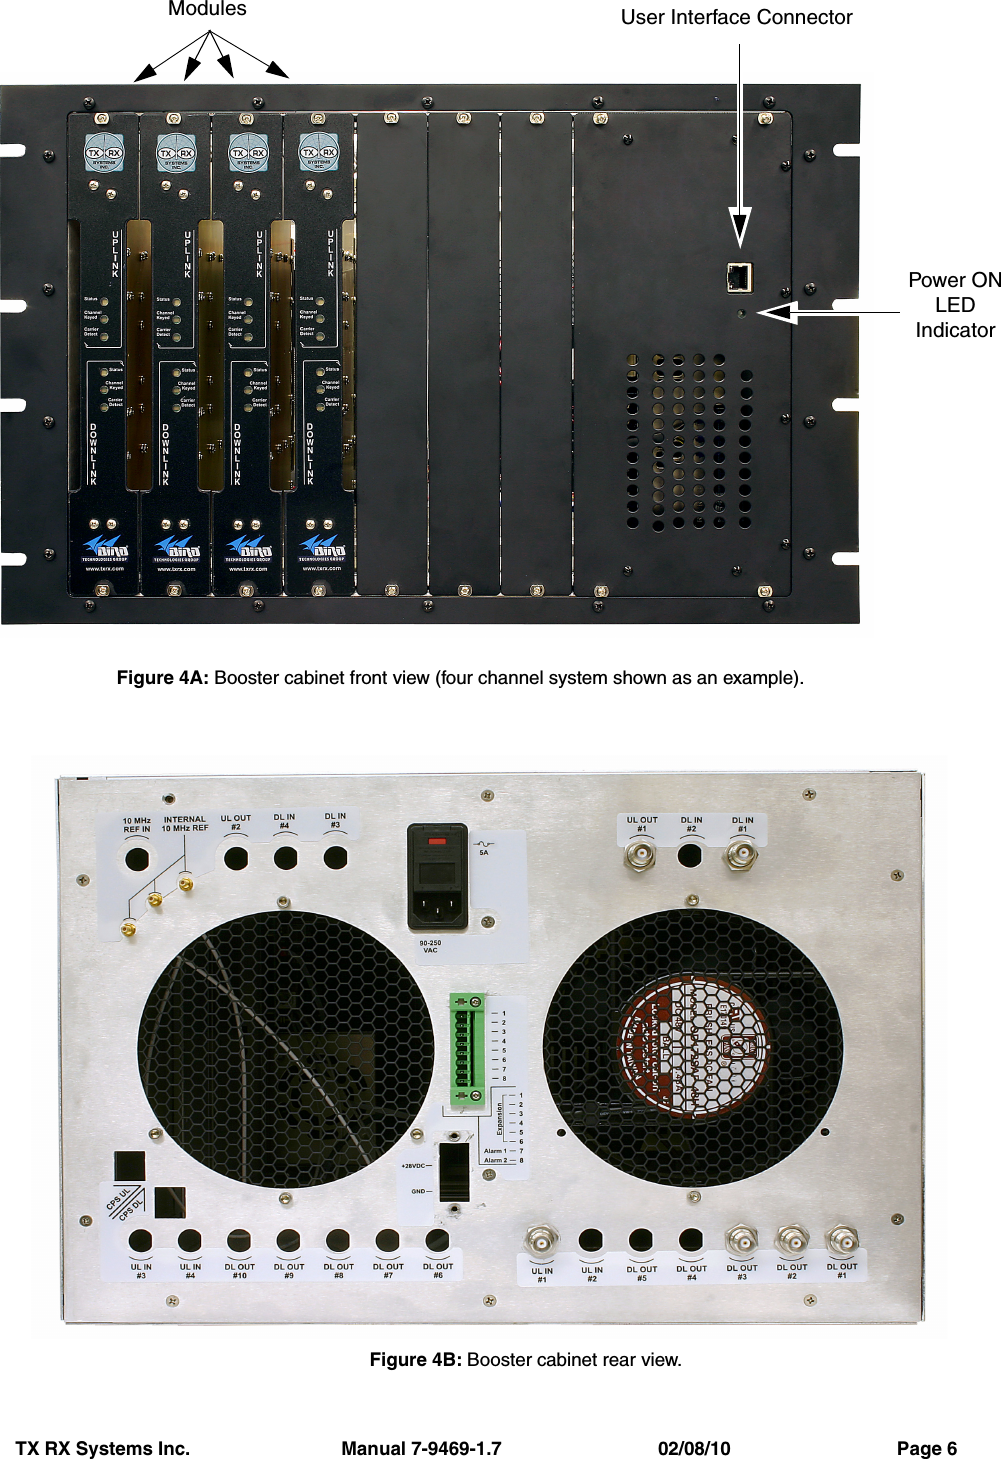 TX RX Systems Inc.                             Manual 7-9469-1.7                              02/08/10                                Page 6Figure 4B: Booster cabinet rear view.Figure 4A: Booster cabinet front view (four channel system shown as an example).User Interface ConnectorPower ONLEDIndicatorModules